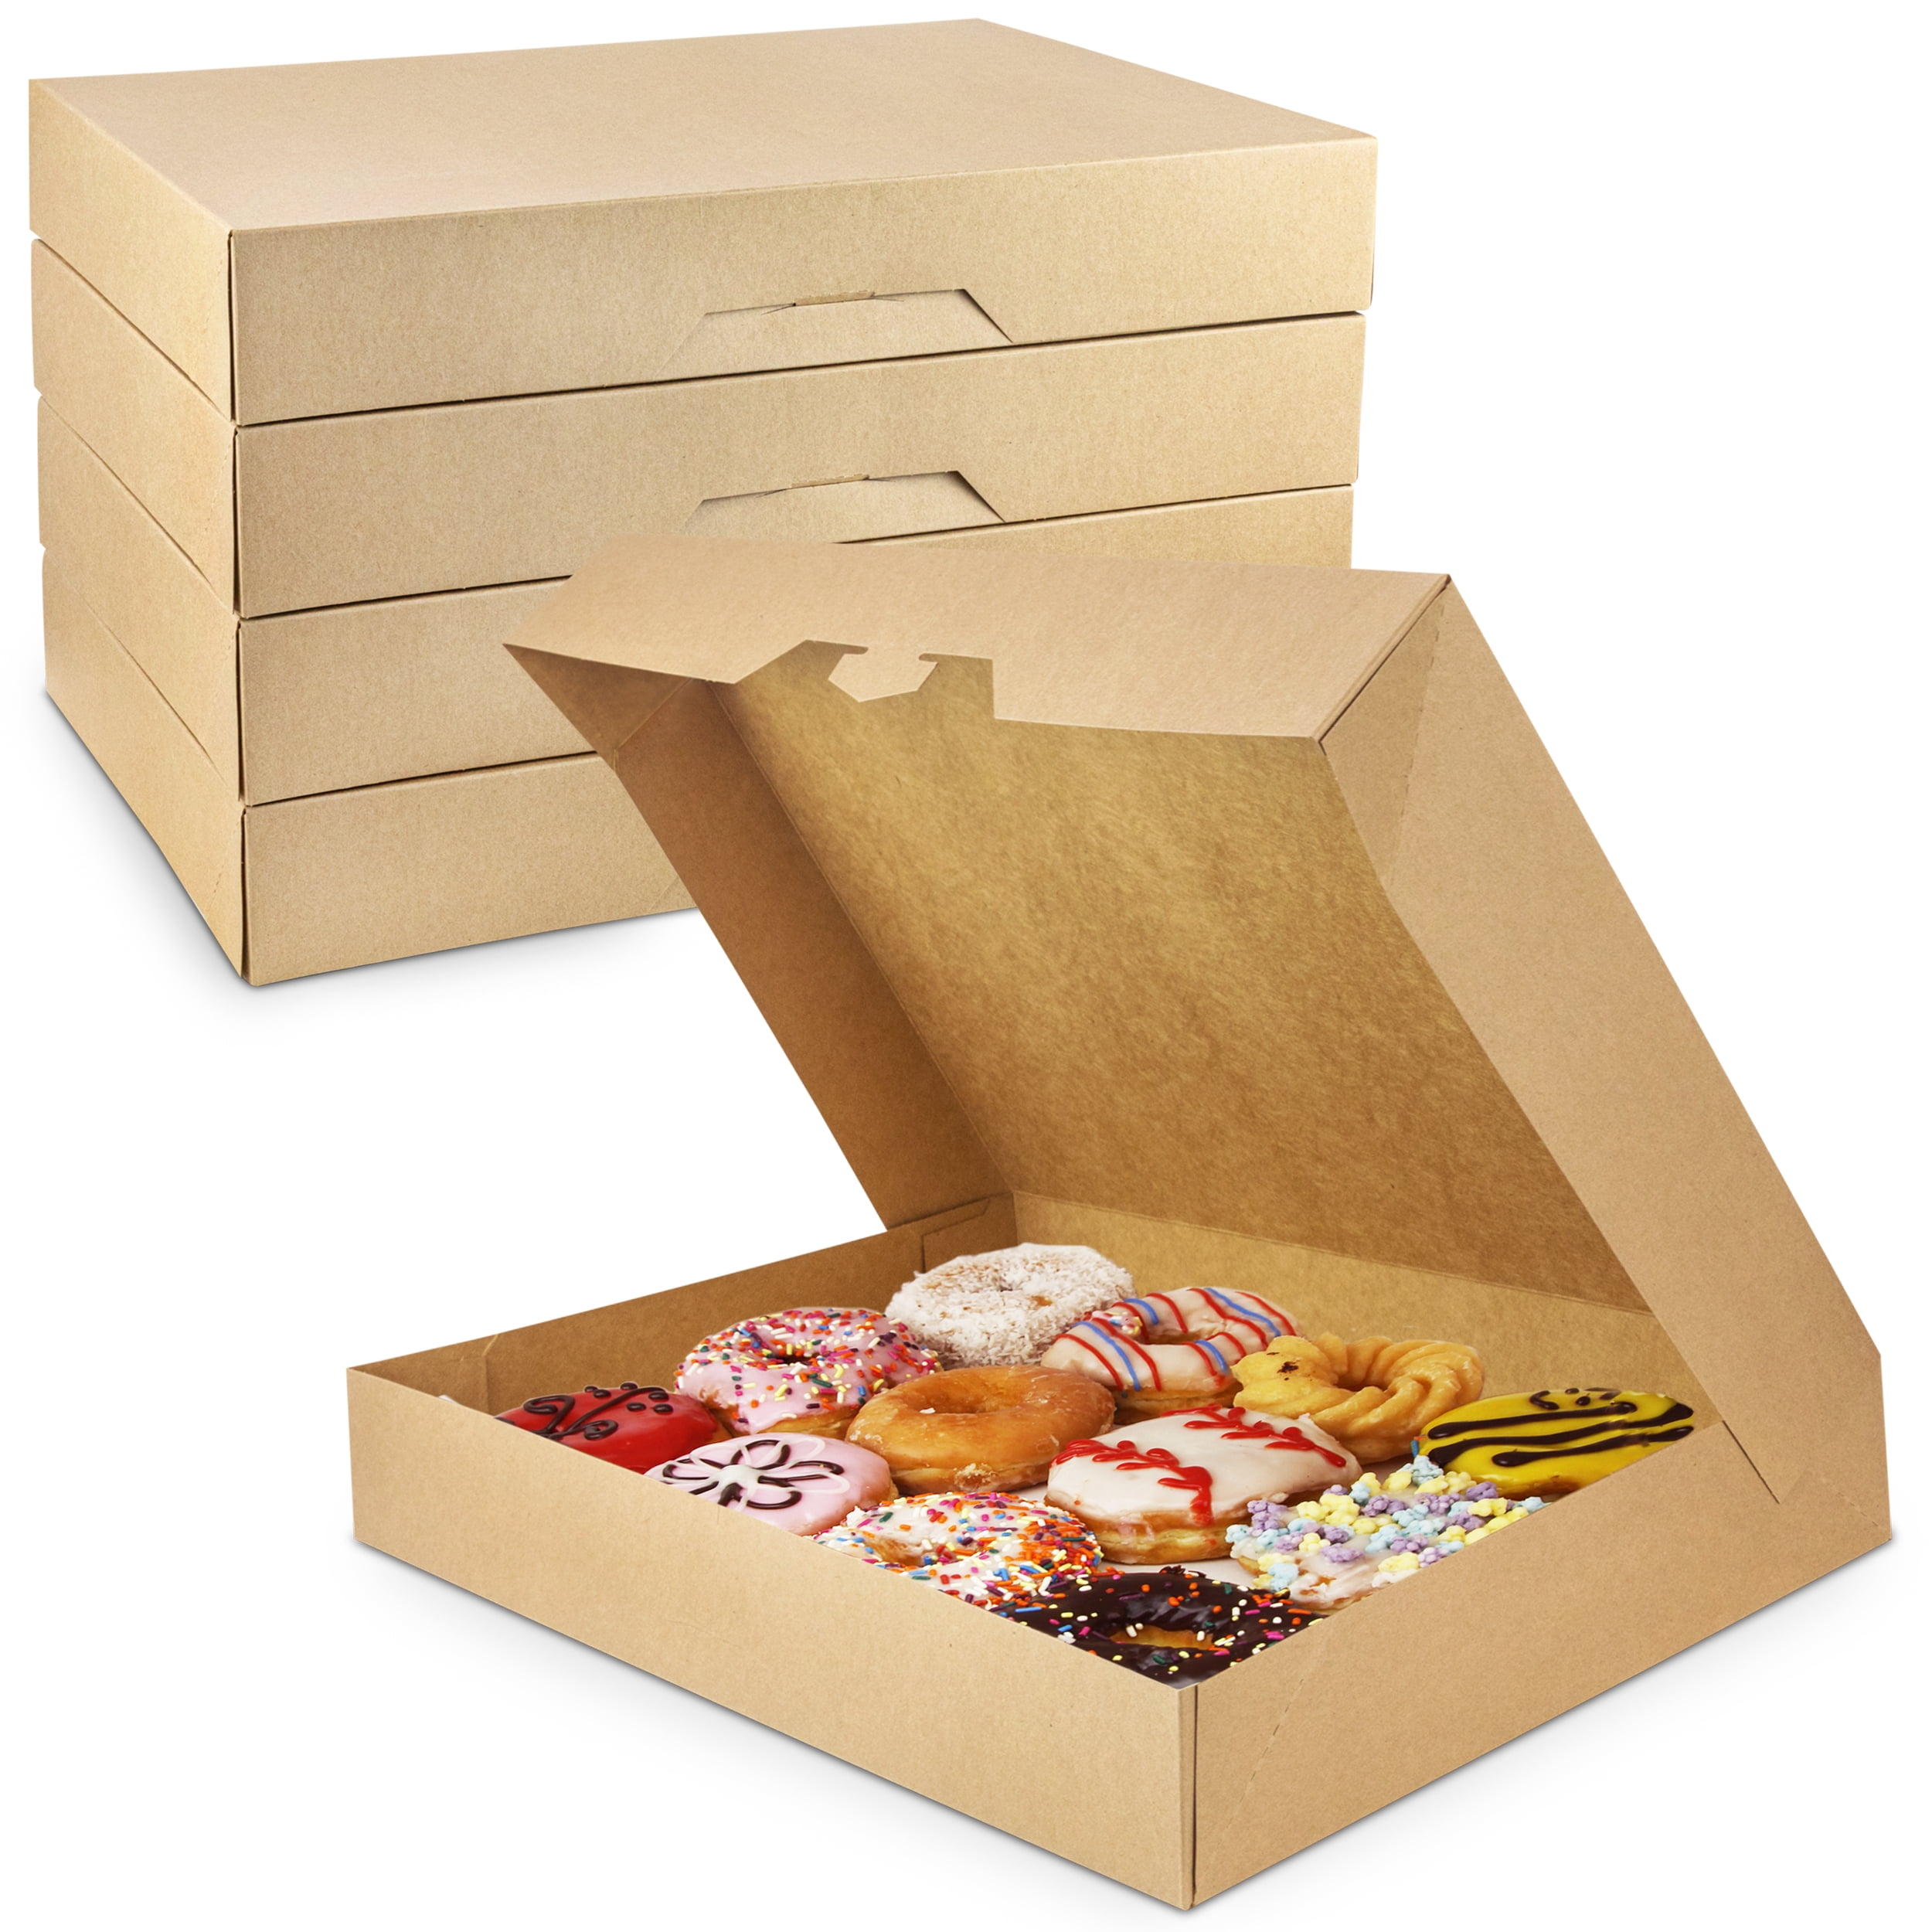 Donuts Gift-Giving Brownies Cookies Cupcakes 6 x 6 x 2.5 Inches Ruisita 15 Pieces Kraft Bakery Boxes with Window Cookie Pie Gift Boxes Auto-popup Treat Boxes for Pastries 